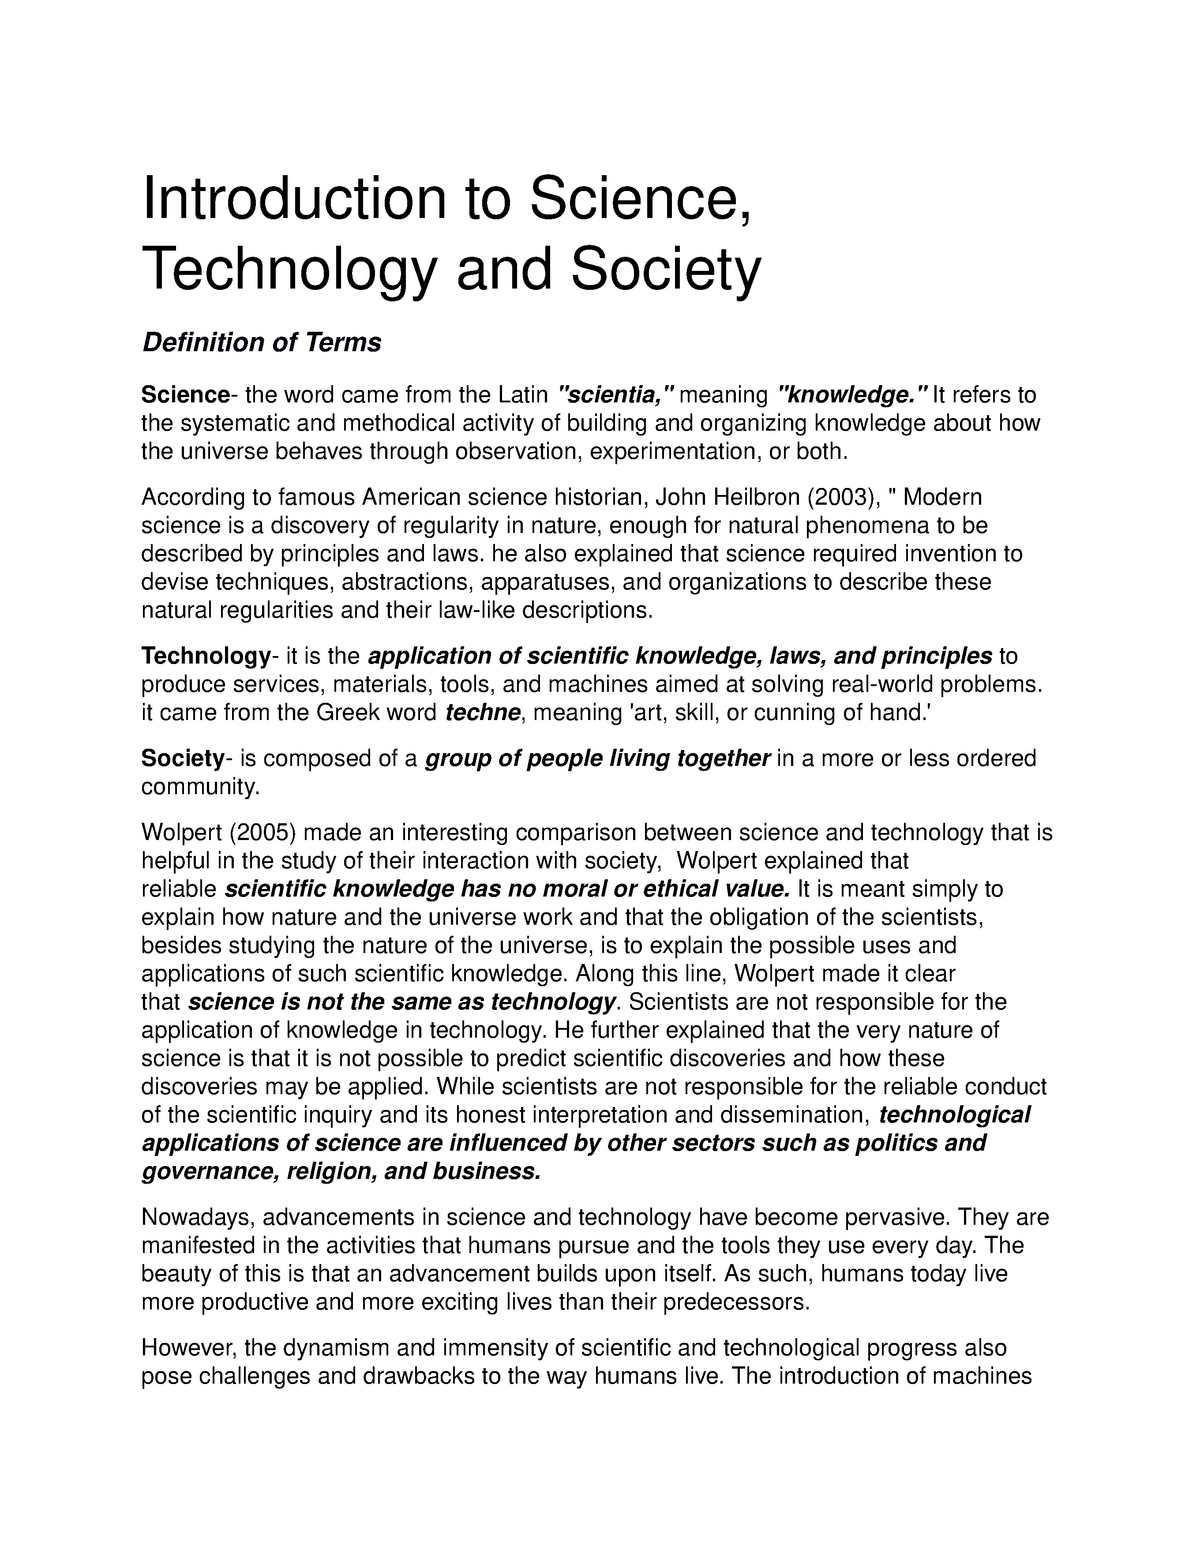 introduction to science technology and society essay